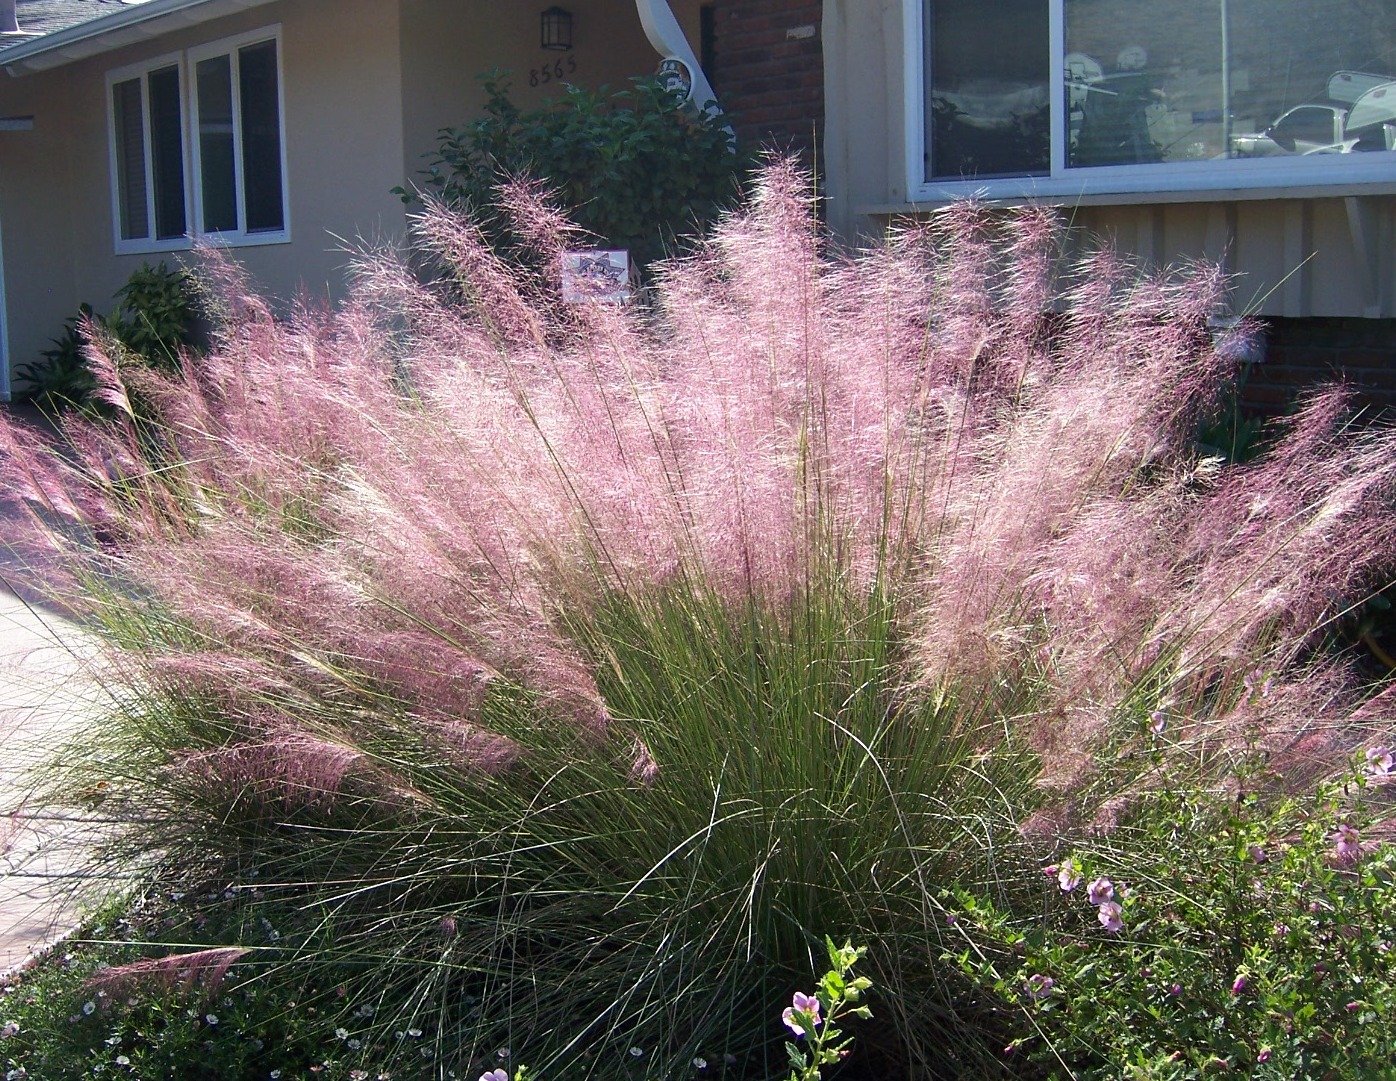 grass muhly pink ornamental grasses muhlenbergia capillaris cotton candy plants plumes garden container landscape try landscaping fall low plant drought